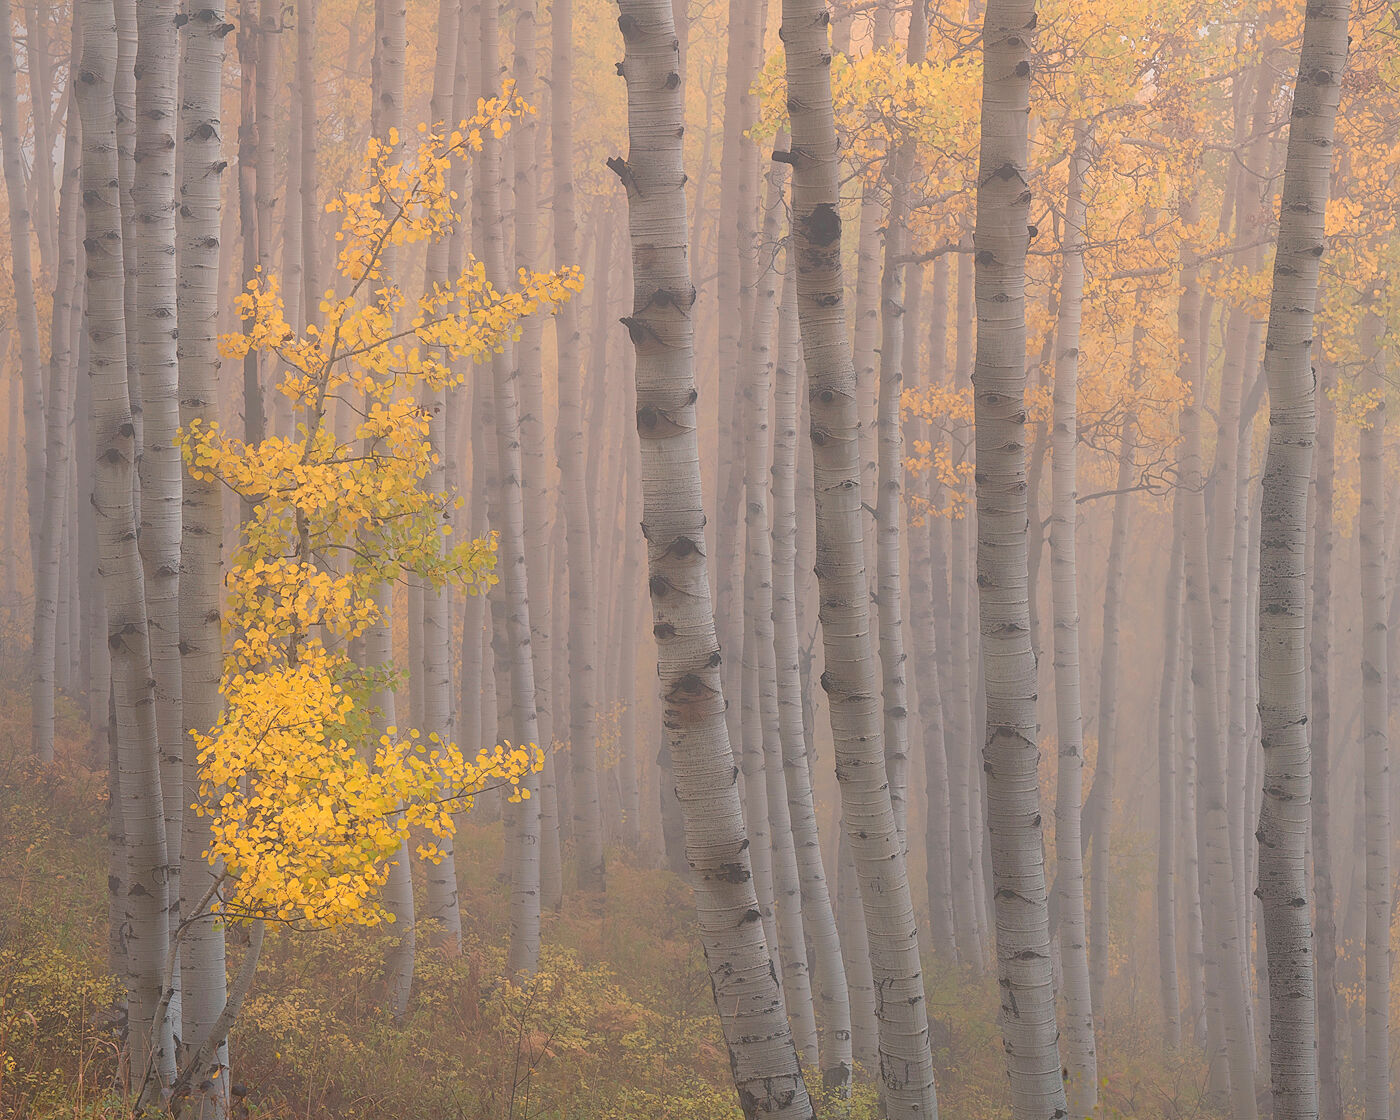 Morning fog allows this peak color aspen sapling to stand out among its older siblings.